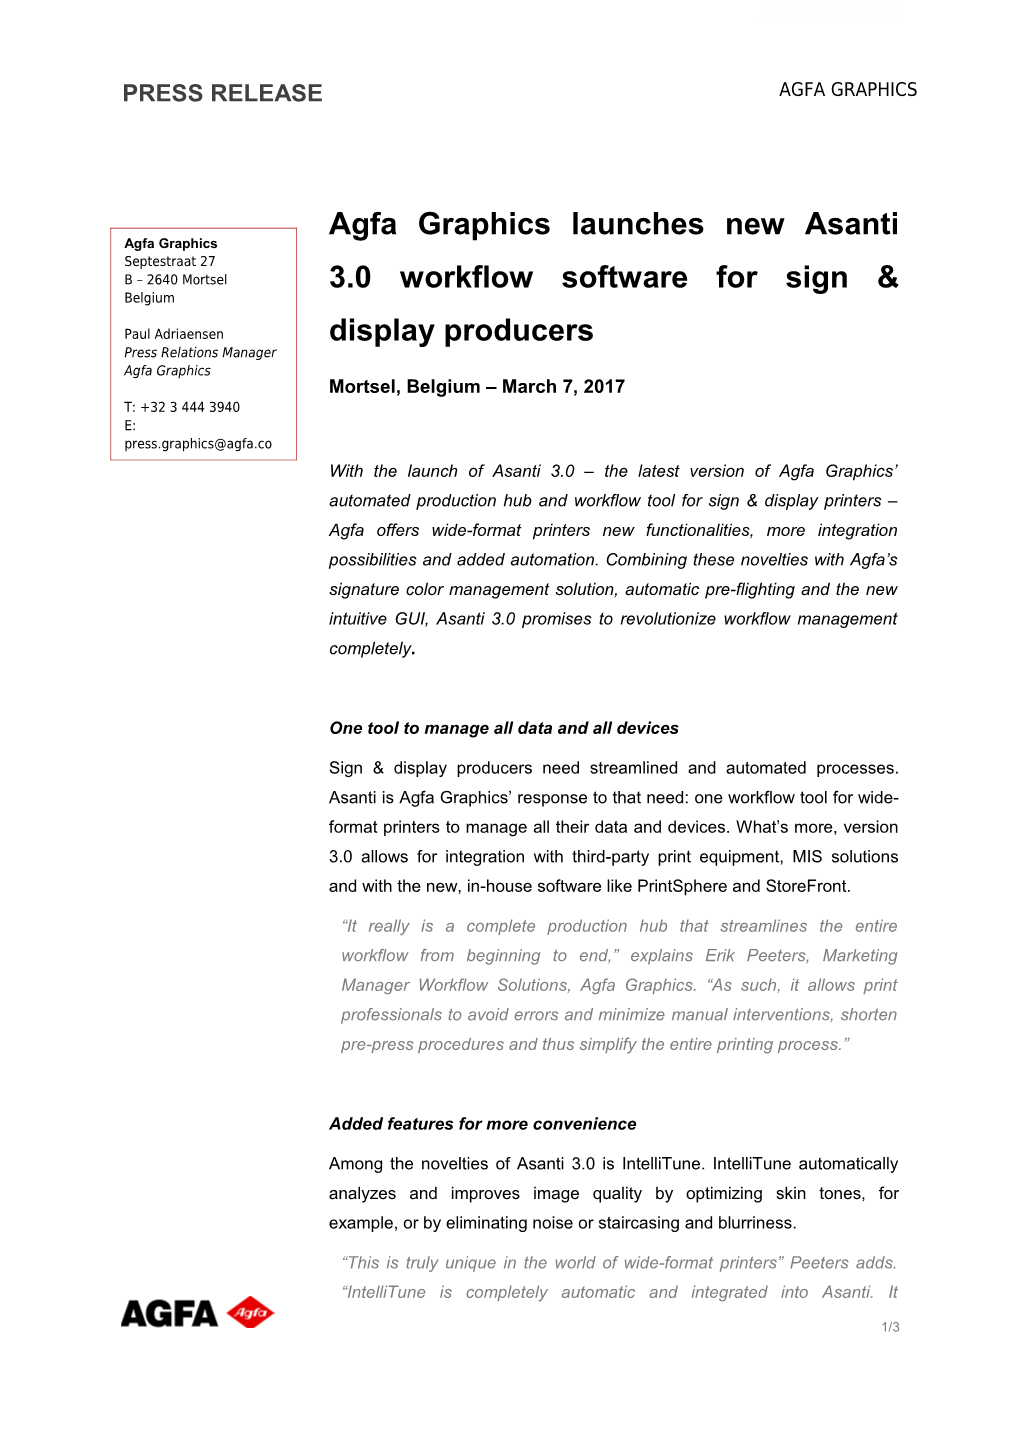 Agfa Graphicslaunches New Asanti 3.0 Workflow Software for Sign Display Producers